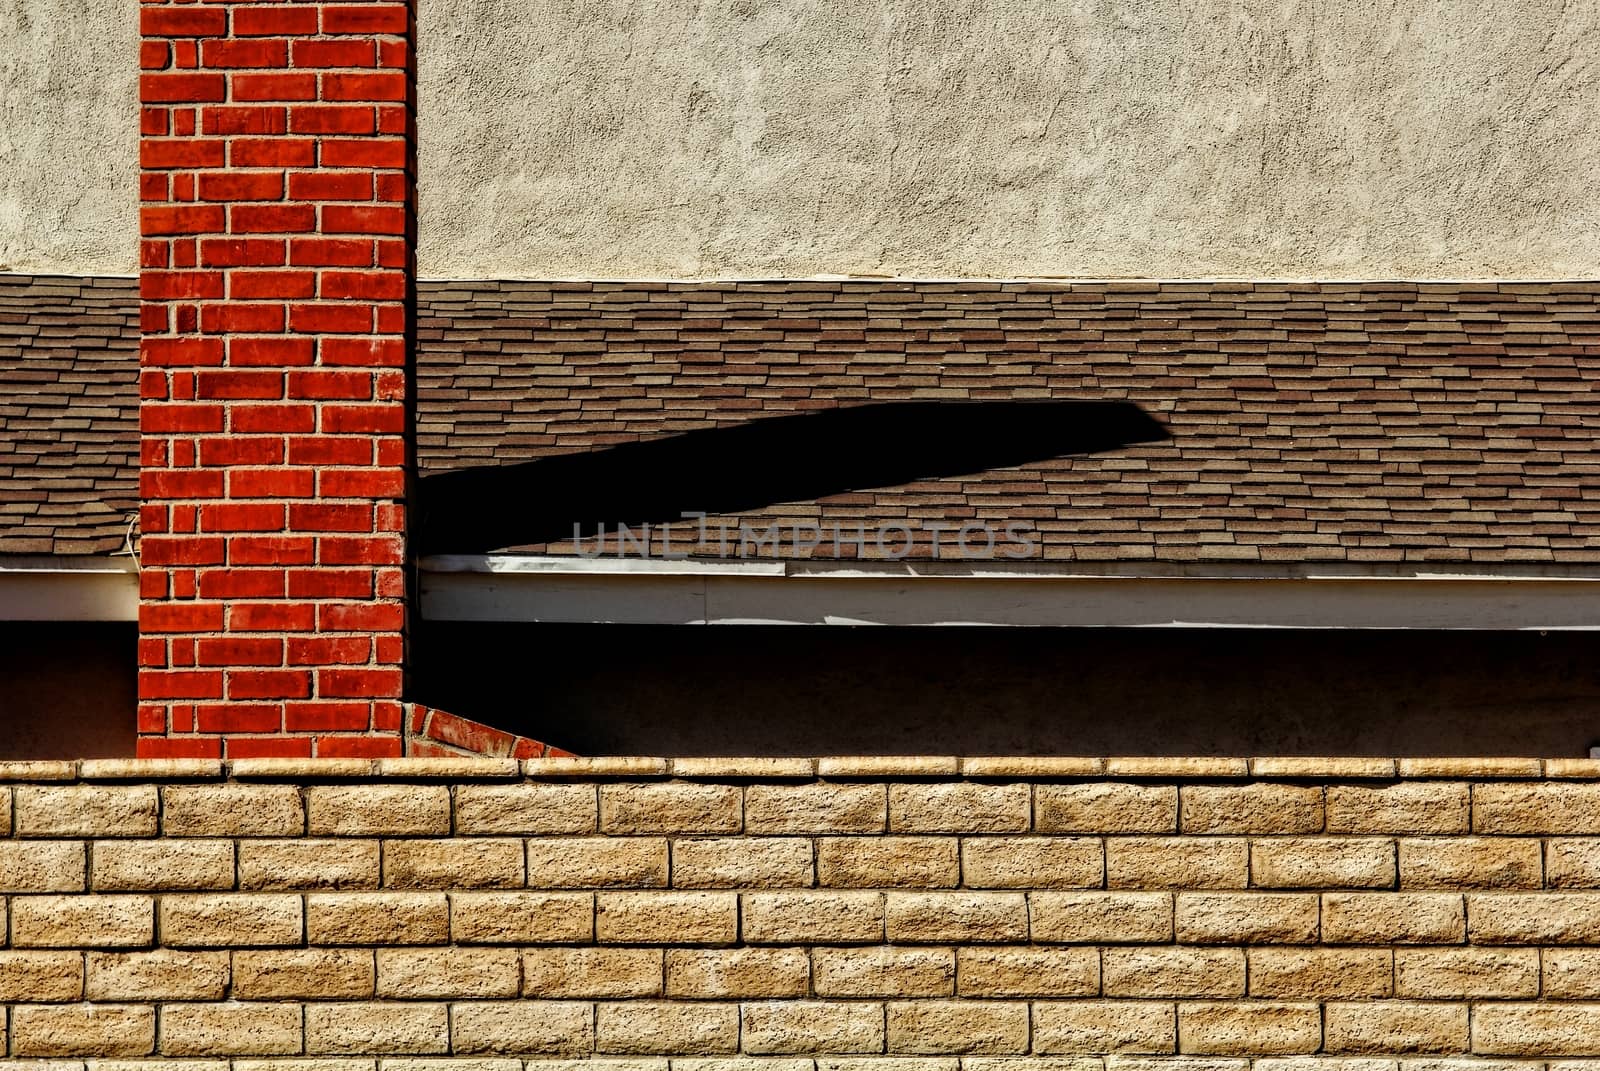 Brick chimney with roof and brick wall by Timmi